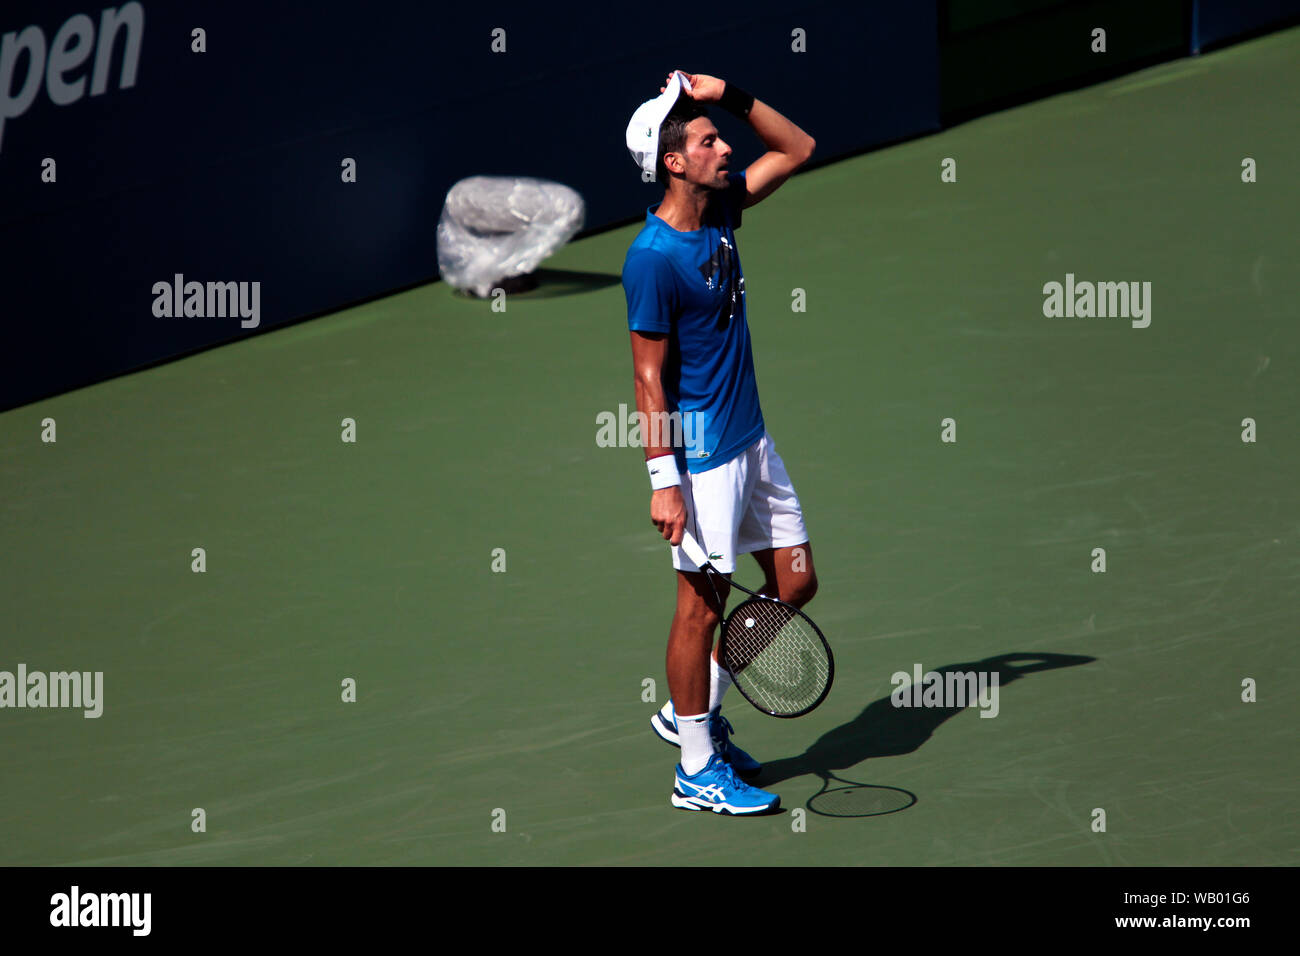 Flushing Meadows, New York, United States - 21 August 2019. Novak Djokovic of Serbia tries to beat the heat while practicing at the National Tennis Center in Flushing Meadows, New York in preparation for the US Open which begins next Monday. Credit: Adam Stoltman/Alamy Live News Stock Photo